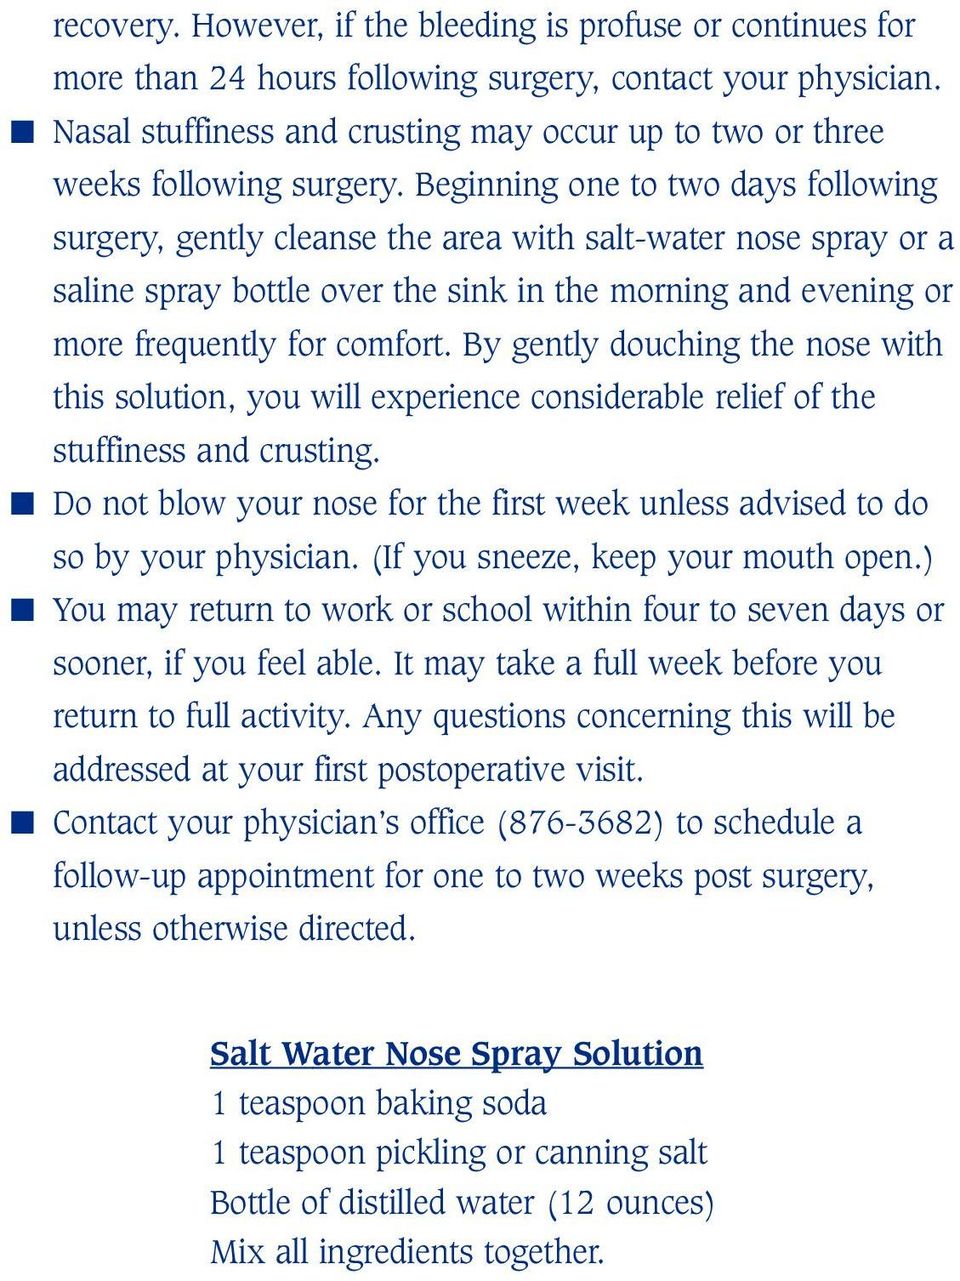 Beginning one to two days following surgery, gently cleanse the area with salt-water nose spray or a saline spray bottle over the sink in the morning and evening or more frequently for comfort.